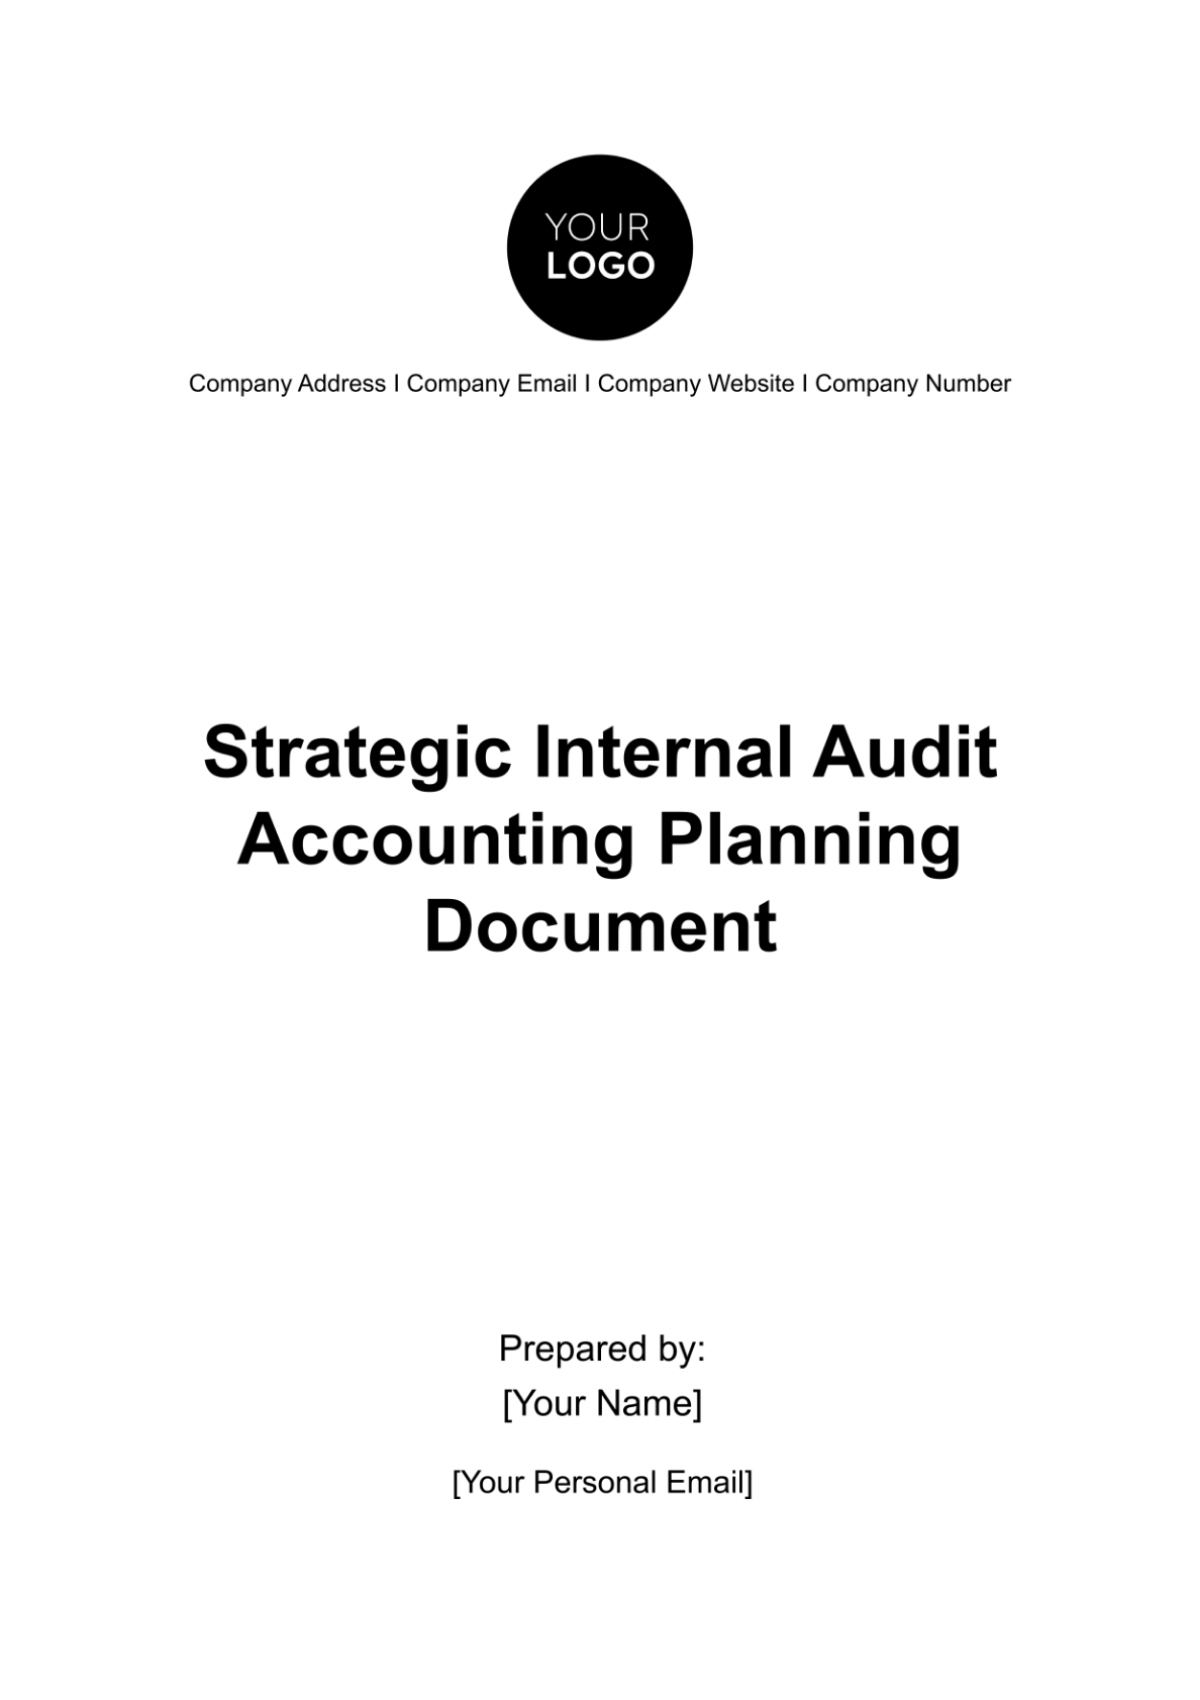 Strategic Internal Audit Accounting Planning Document Template